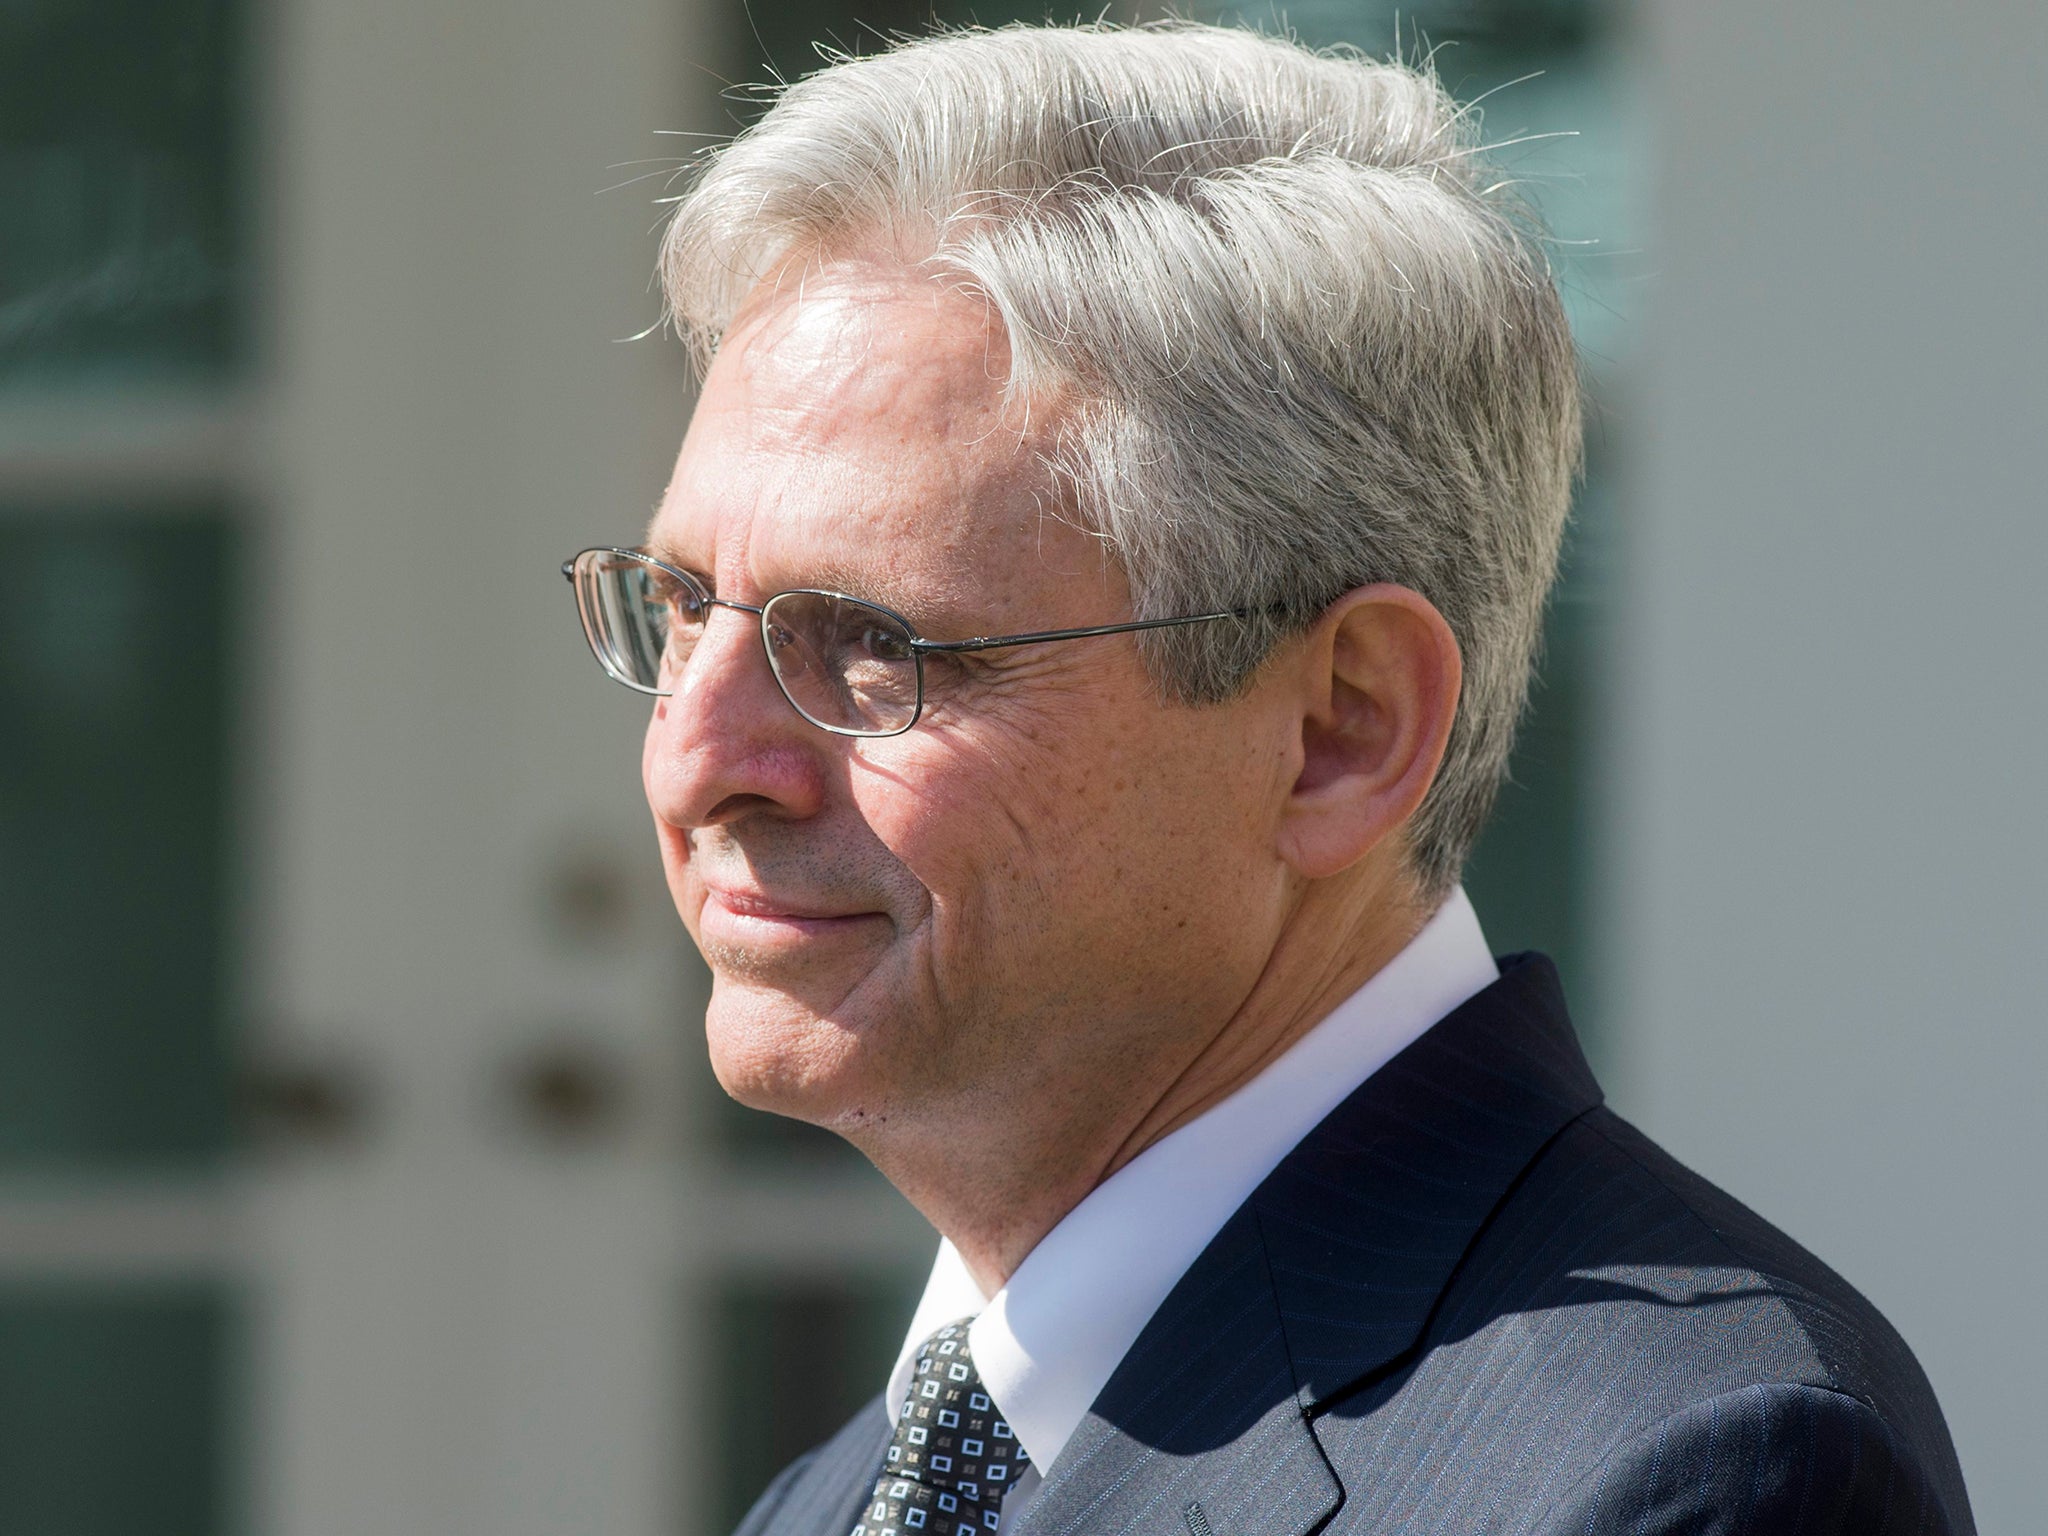 Obama nominated Judge Garland to fill the vacancy created by the death of Associate Justice Antonin Scalia